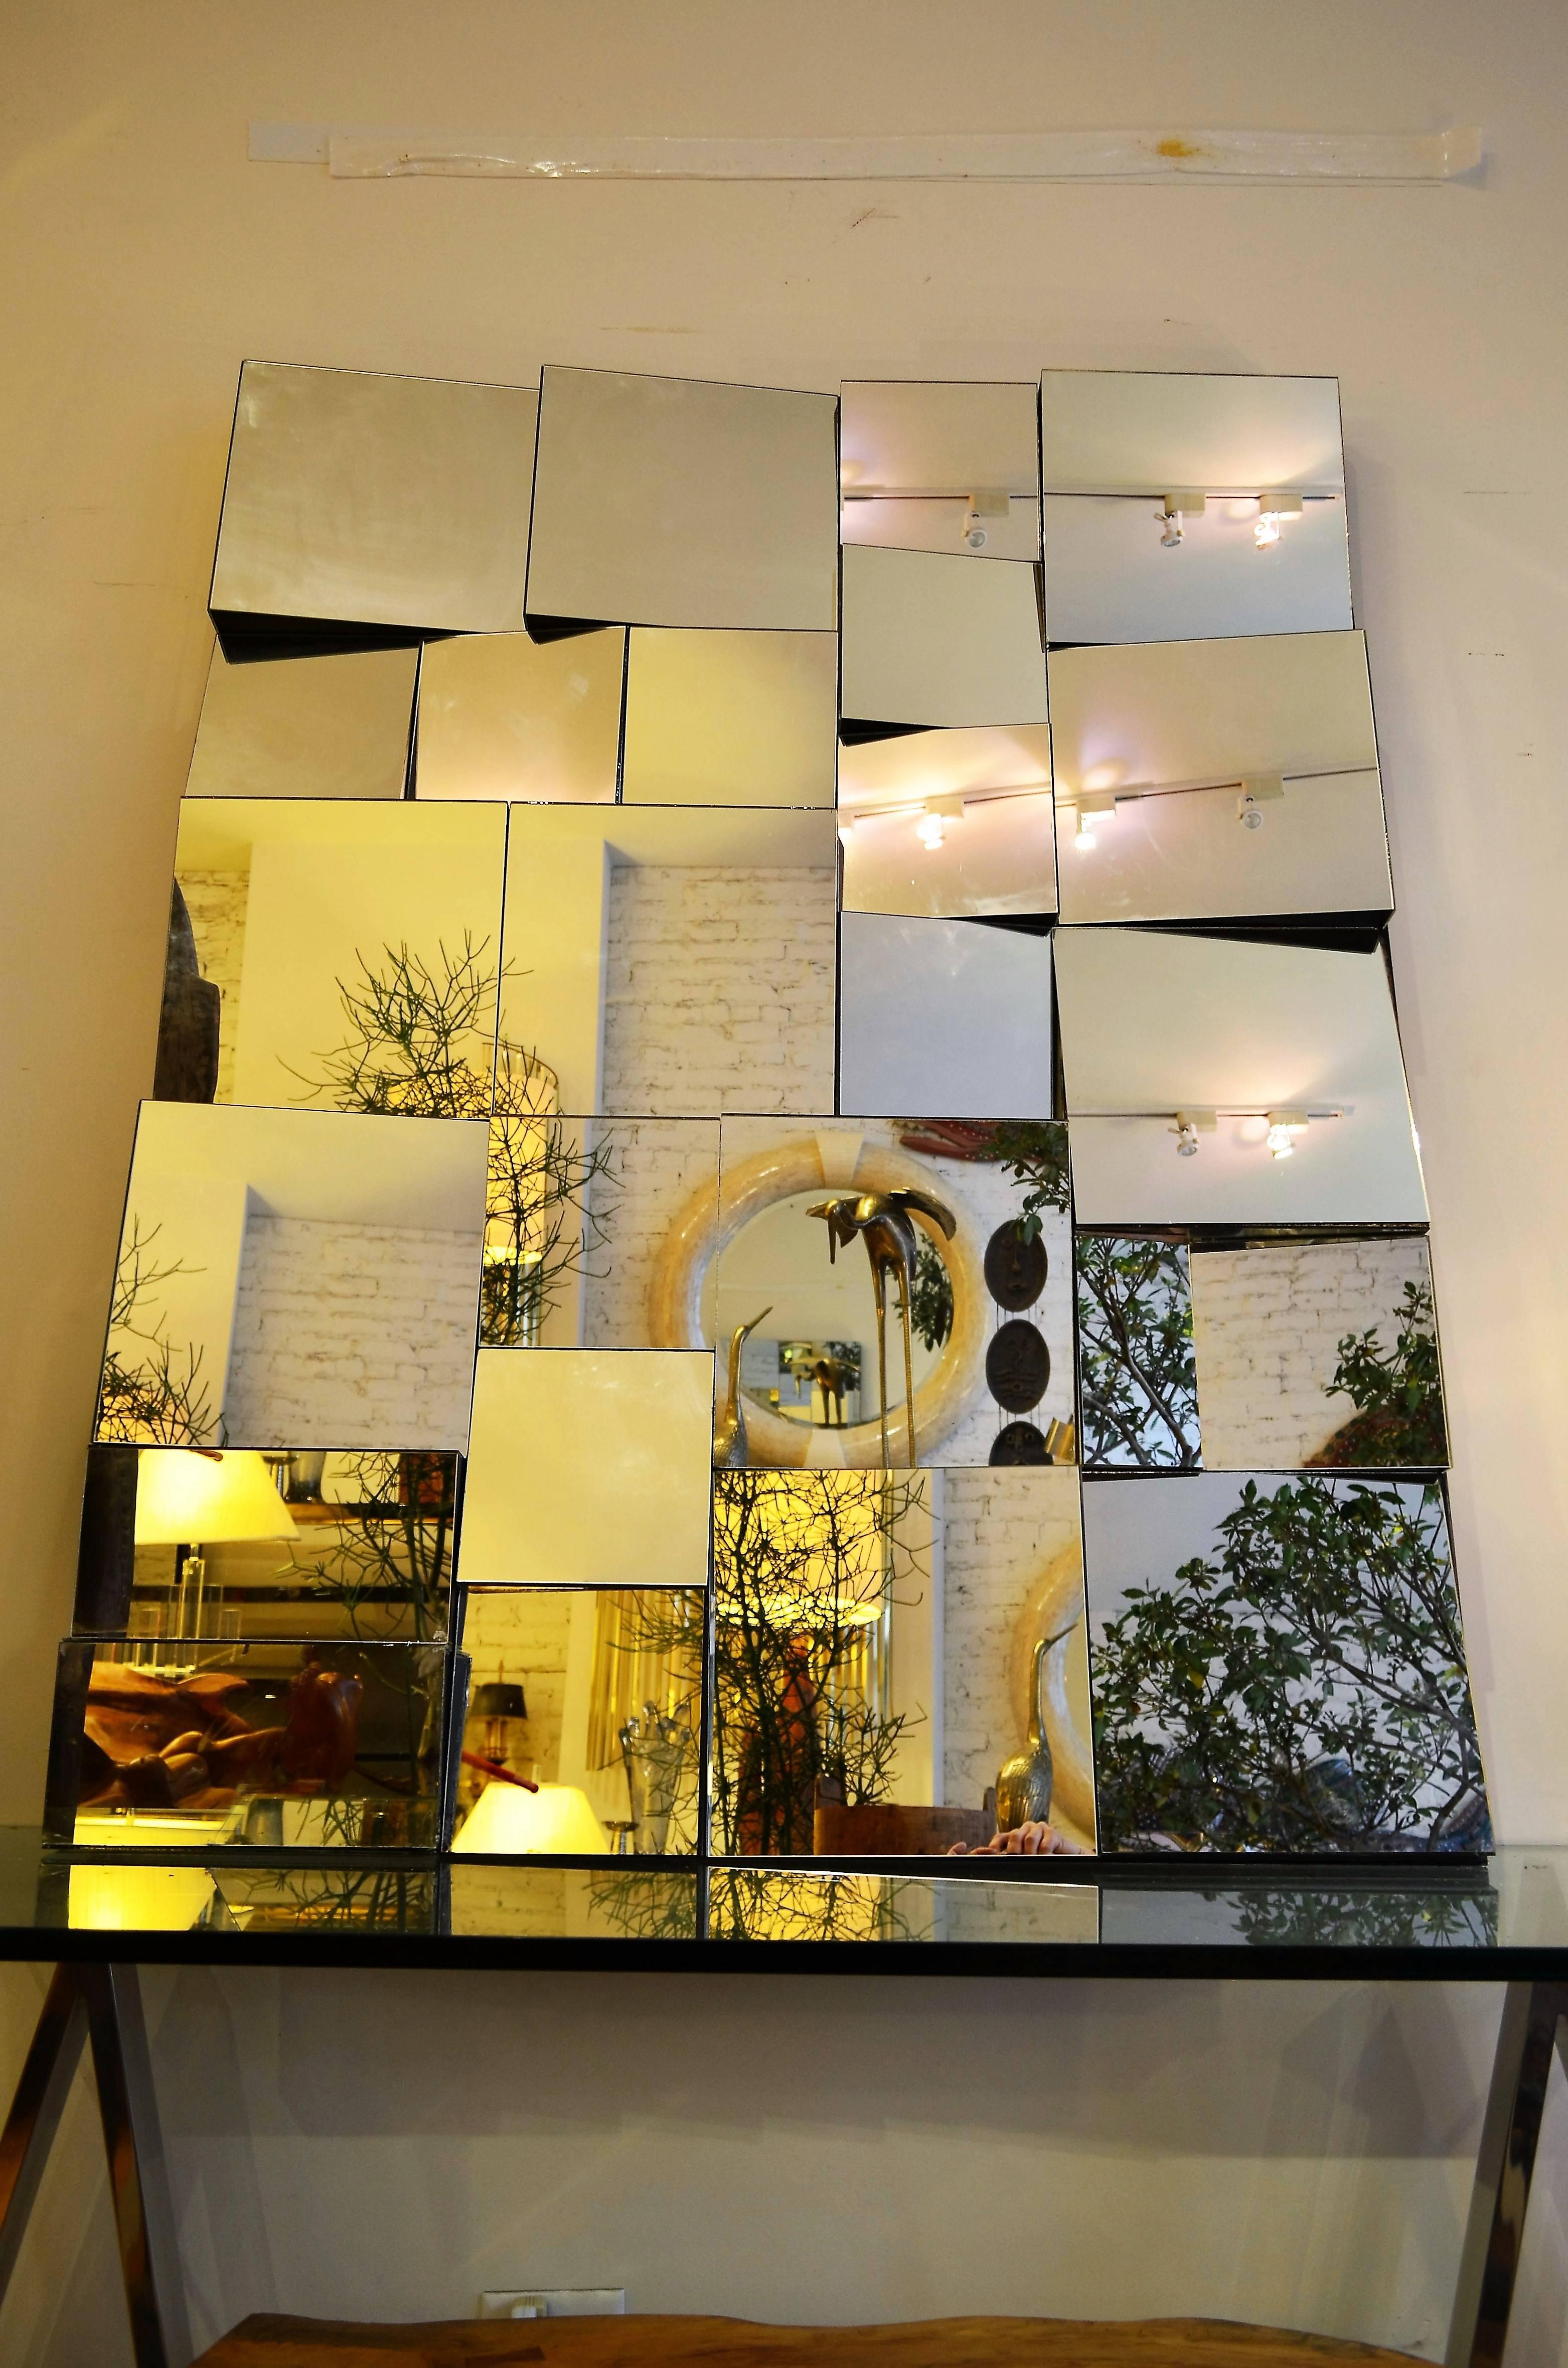 Large Neal Small  Slopes Mirror.
Cubist style mirror in a black wood frame.
Can be hung vertically or horizontally.
Great sculptural wall art.